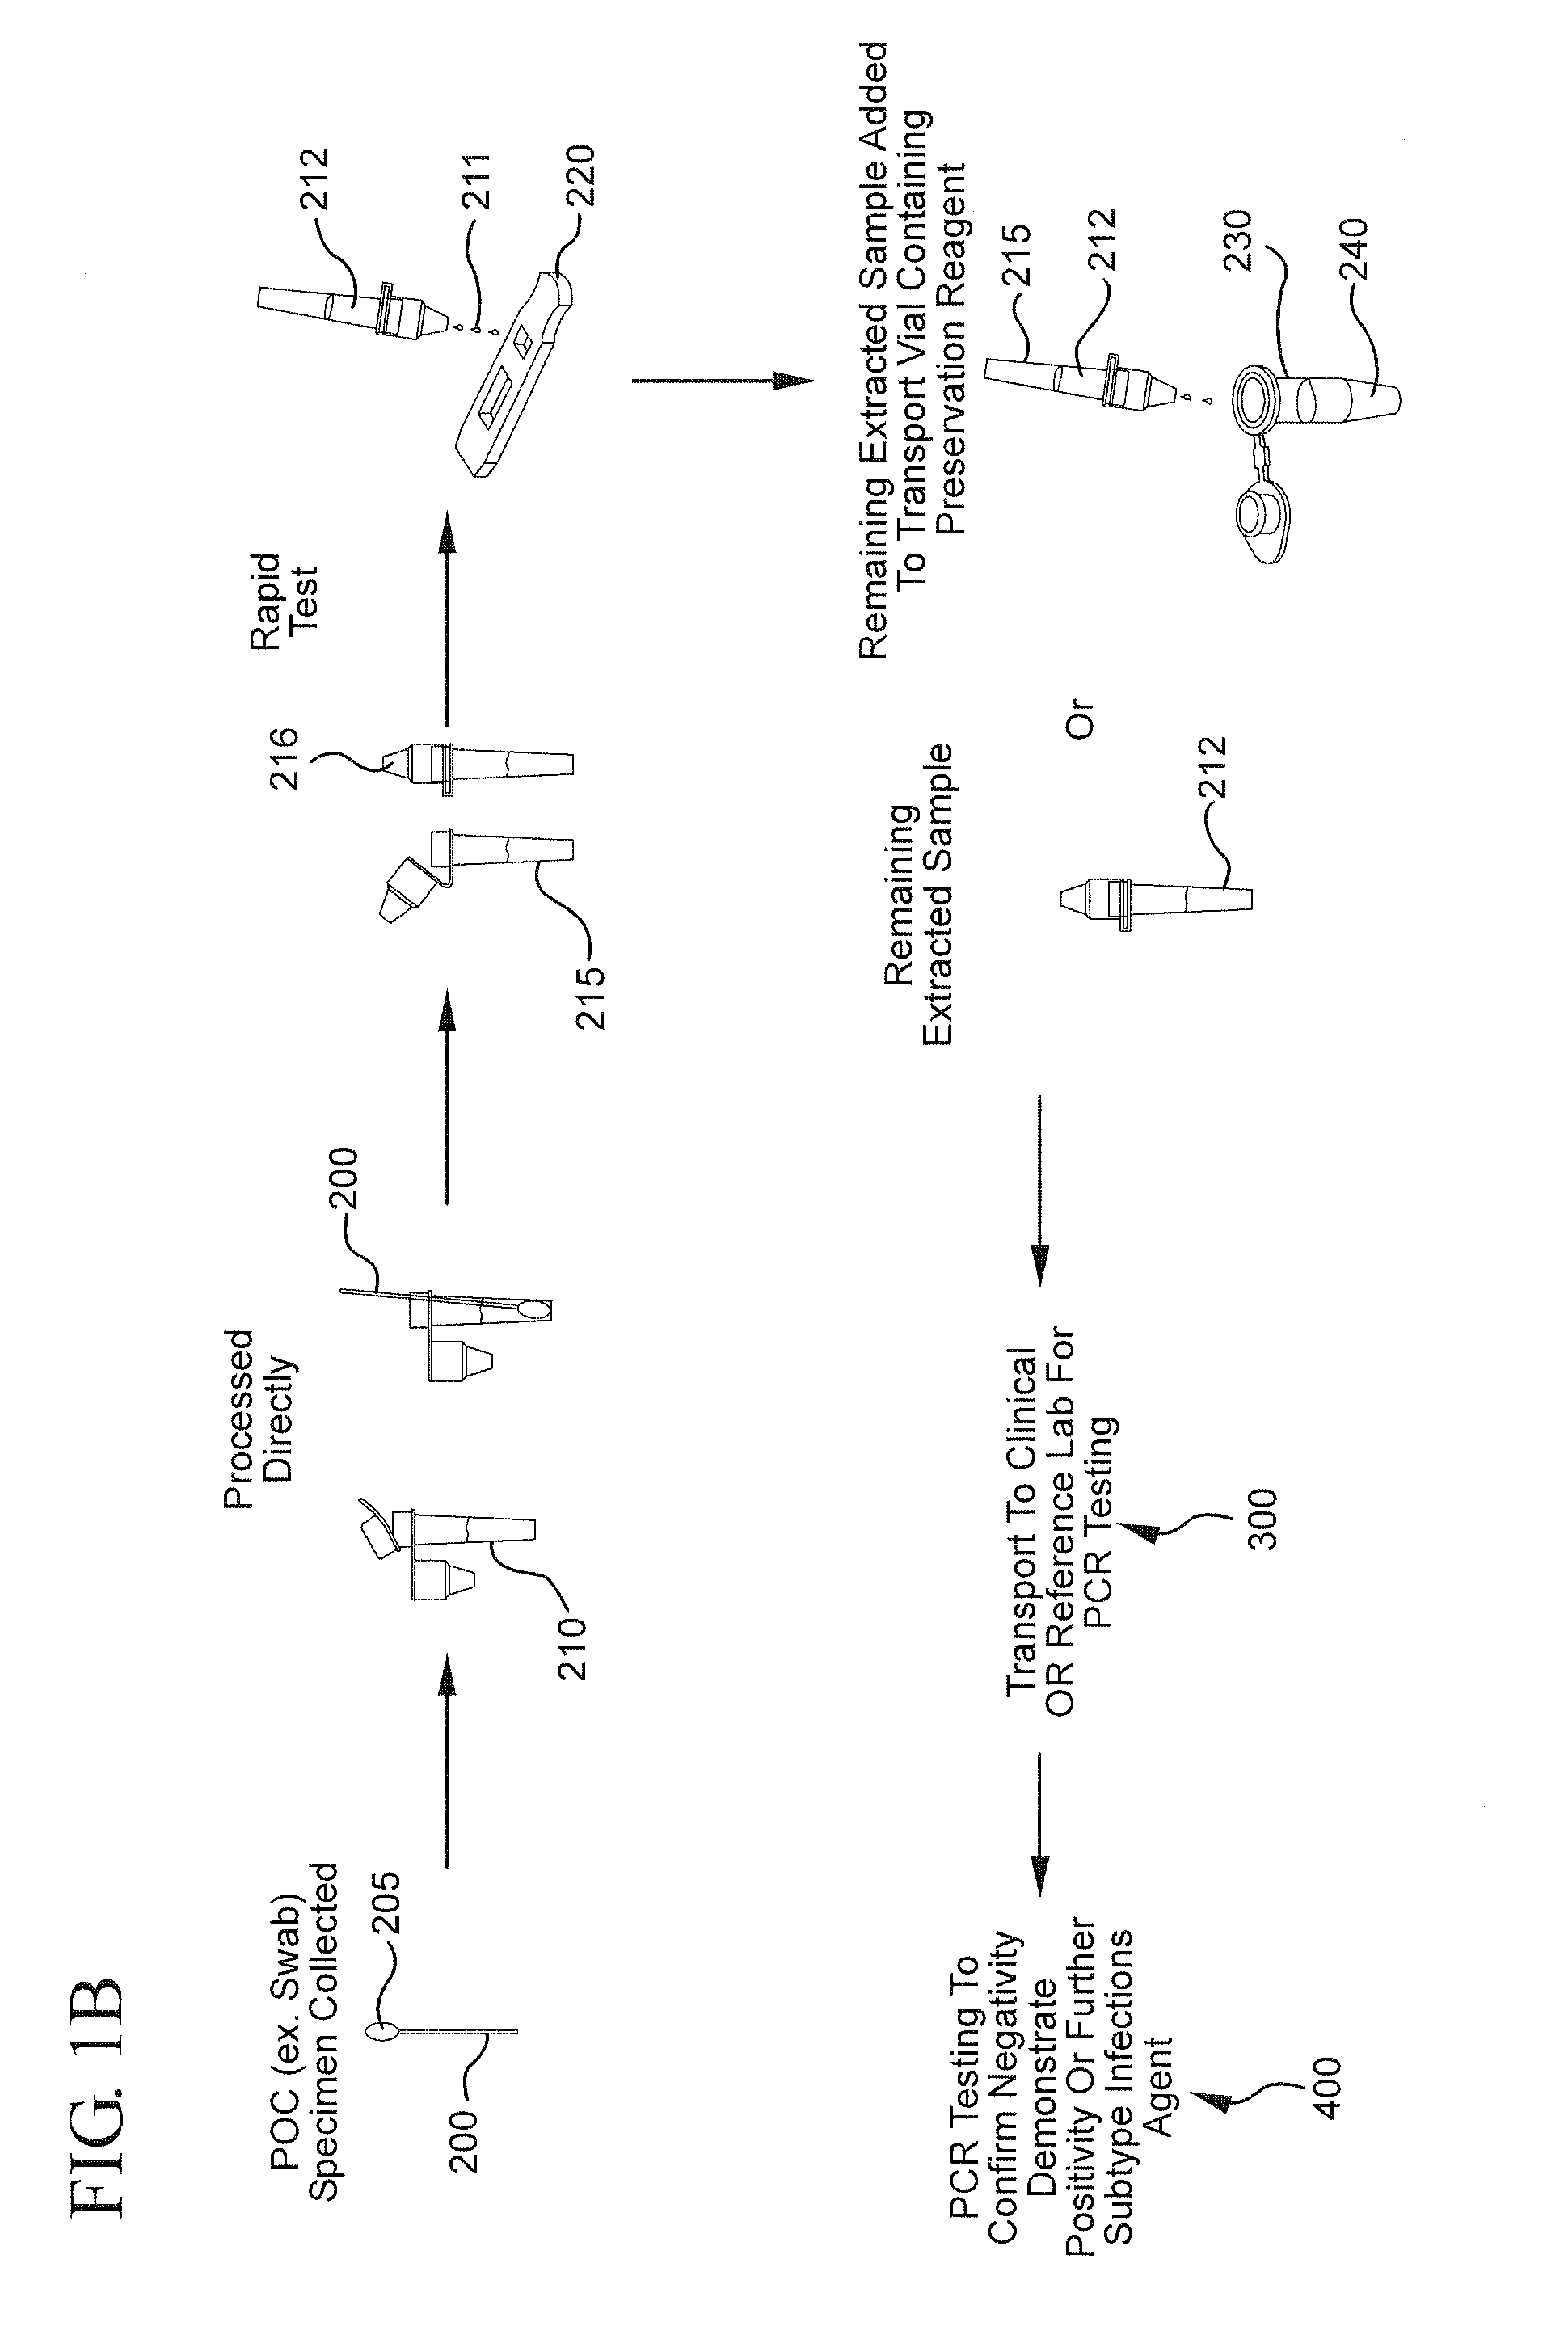 Method for linking point of care rapid diagnostic testing results to laboratory-based methods